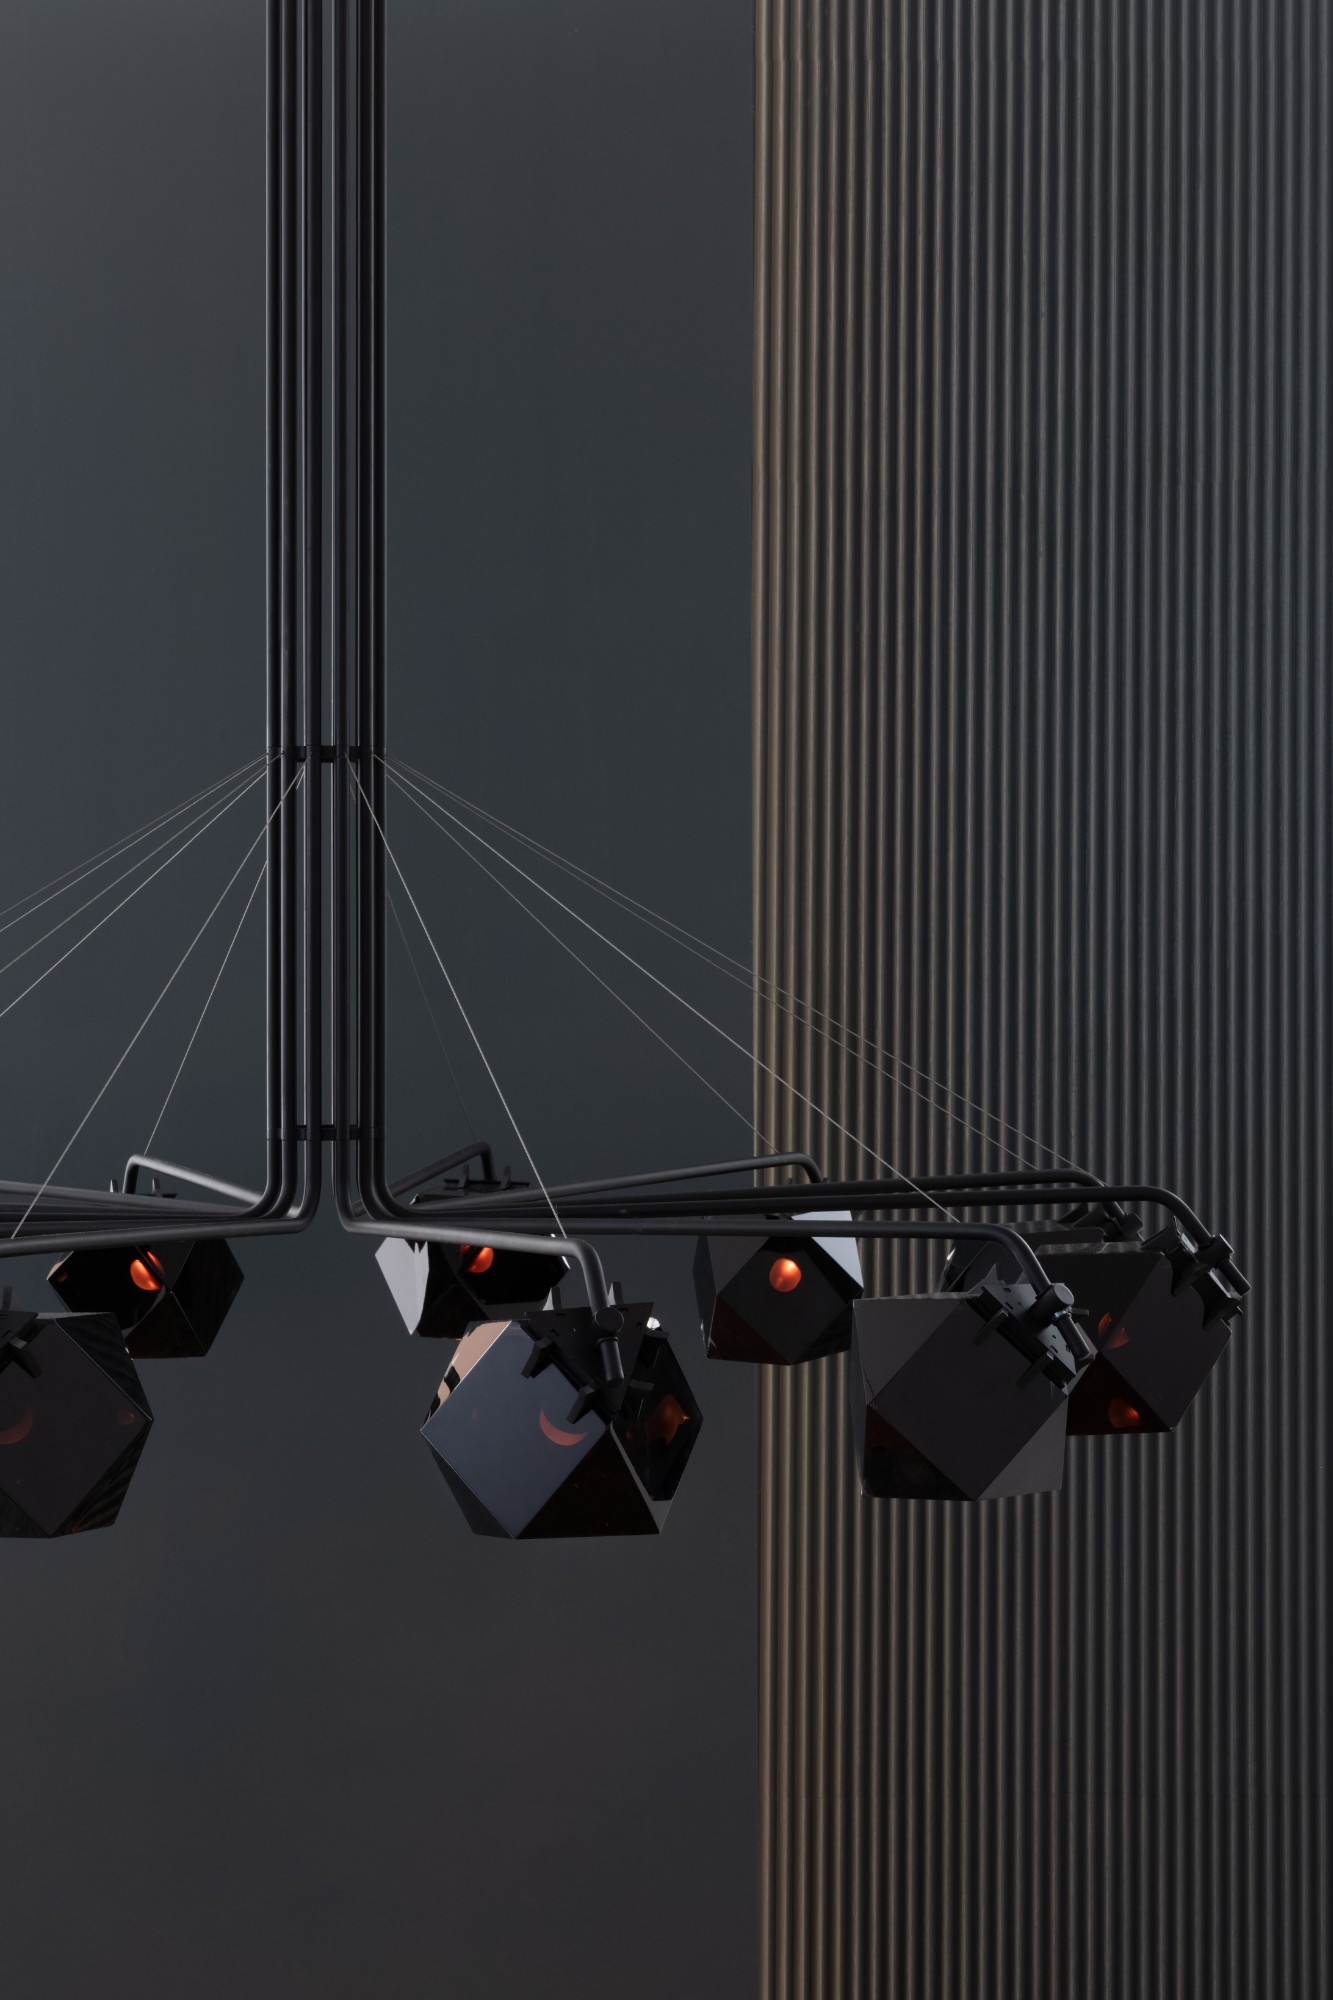 lighting collection, Gabriel Scott Launches Welles Reimagined Lighting Collection